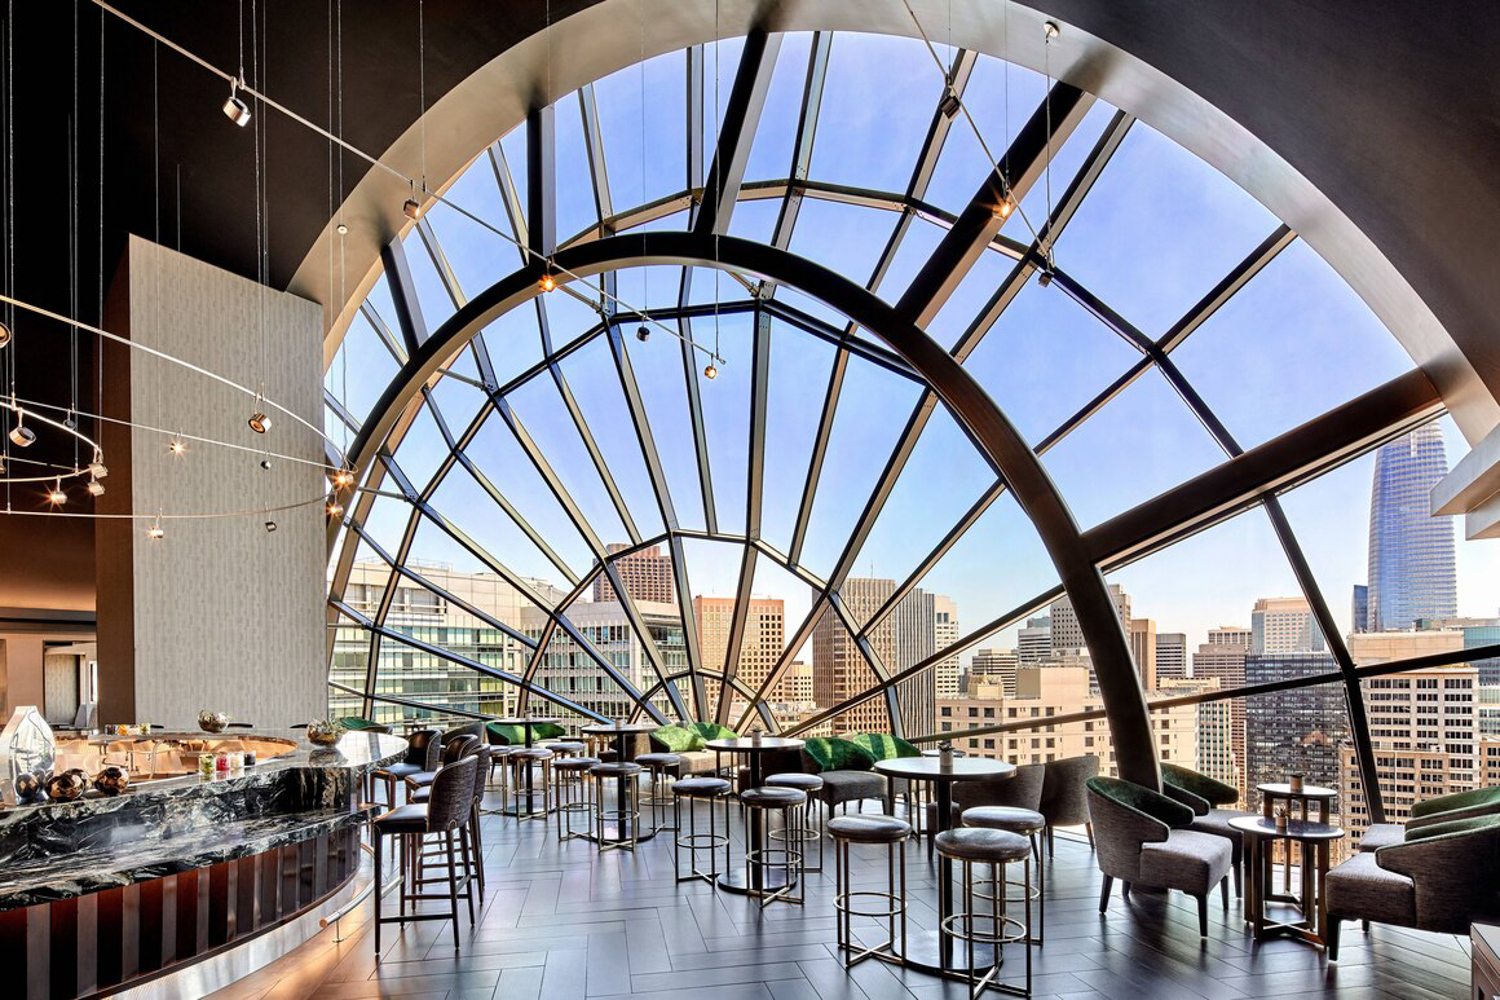 The skyview lounge at the Marriott Marquis at 55 Fourth Street, image via Marriott